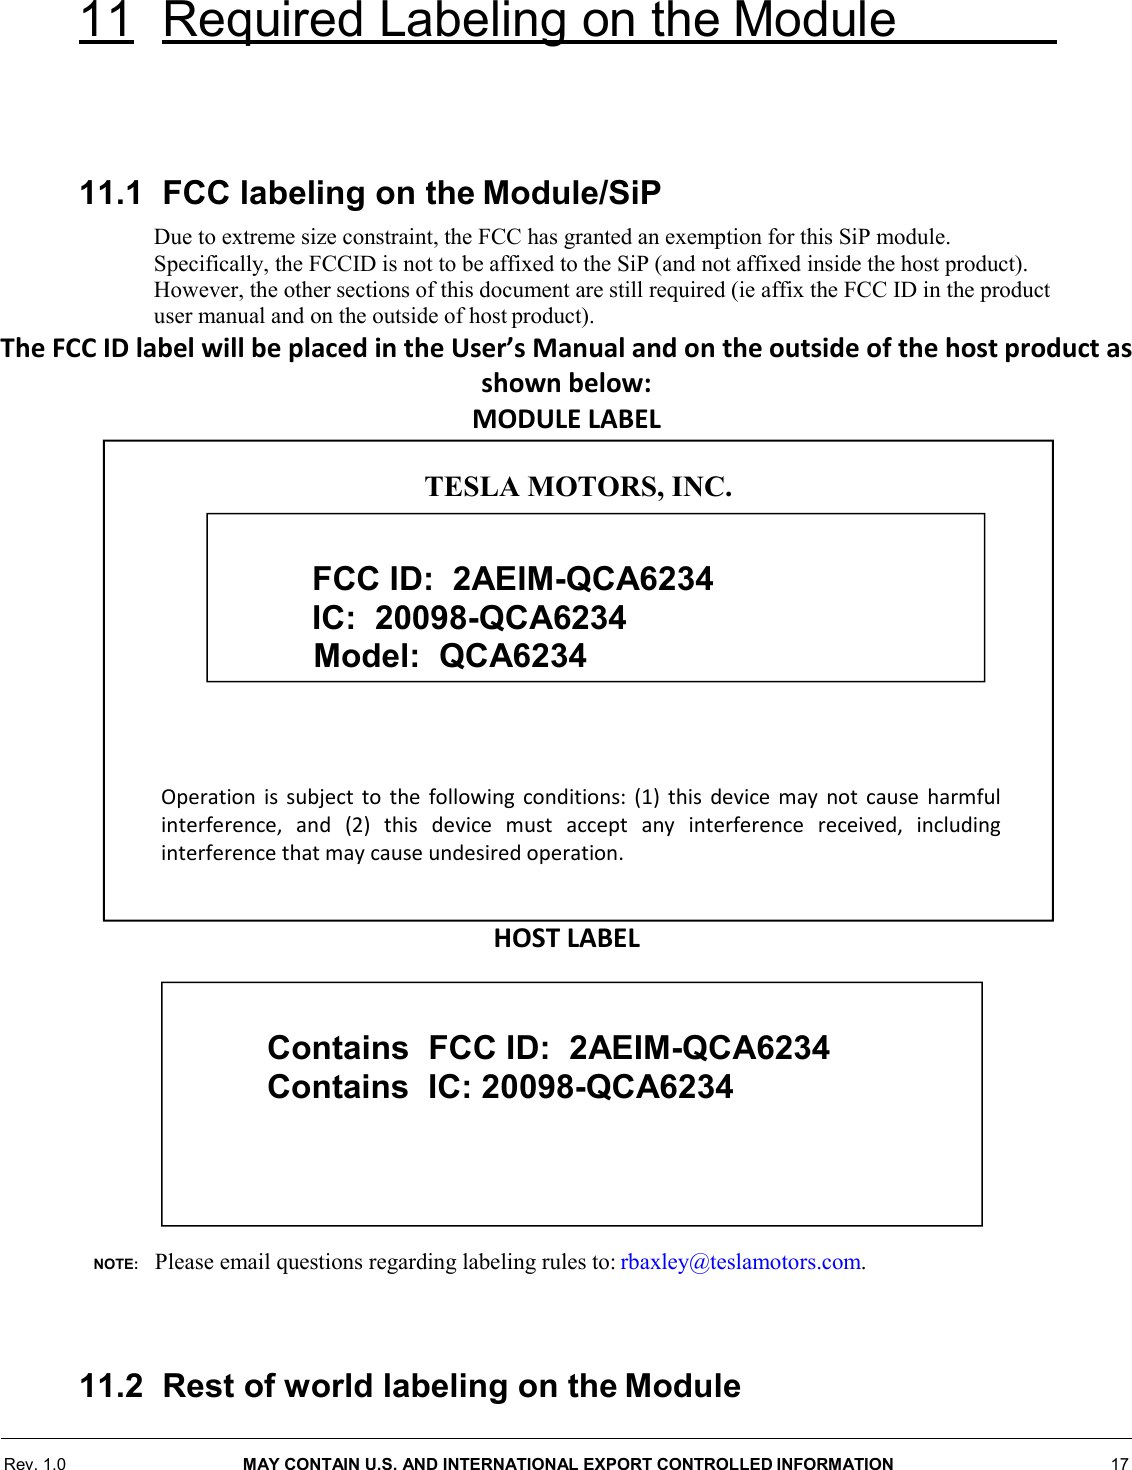 Rev. 1.0  MAY CONTAIN U.S. AND INTERNATIONAL EXPORT CONTROLLED INFORMATION 17  11 Required Labeling on the Module        11.1  FCC labeling on the Module/SiP Due to extreme size constraint, the FCC has granted an exemption for this SiP module. Specifically, the FCCID is not to be affixed to the SiP (and not affixed inside the host product). However, the other sections of this document are still required (ie affix the FCC ID in the product user manual and on the outside of host product). The FCC ID label will be placed in the User’s Manual and on the outside of the host product as shown below: MODULE LABEL                   HOST LABEL           NOTE:    Please email questions regarding labeling rules to: rbaxley@teslamotors.com.    11.2  Rest of world labeling on the Module  TESLA MOTORS, INC.              Operation is subject to the following conditions: (1) this device may not cause harmful interference, and (2) this device must accept any interference received, including interference that may cause undesired operation.  FCC ID:  2AEIM-QCA6234 IC:  20098-QCA6234      Model:  QCA6234   Contains  FCC ID:  2AEIM-QCA6234  Contains  IC: 20098-QCA6234      